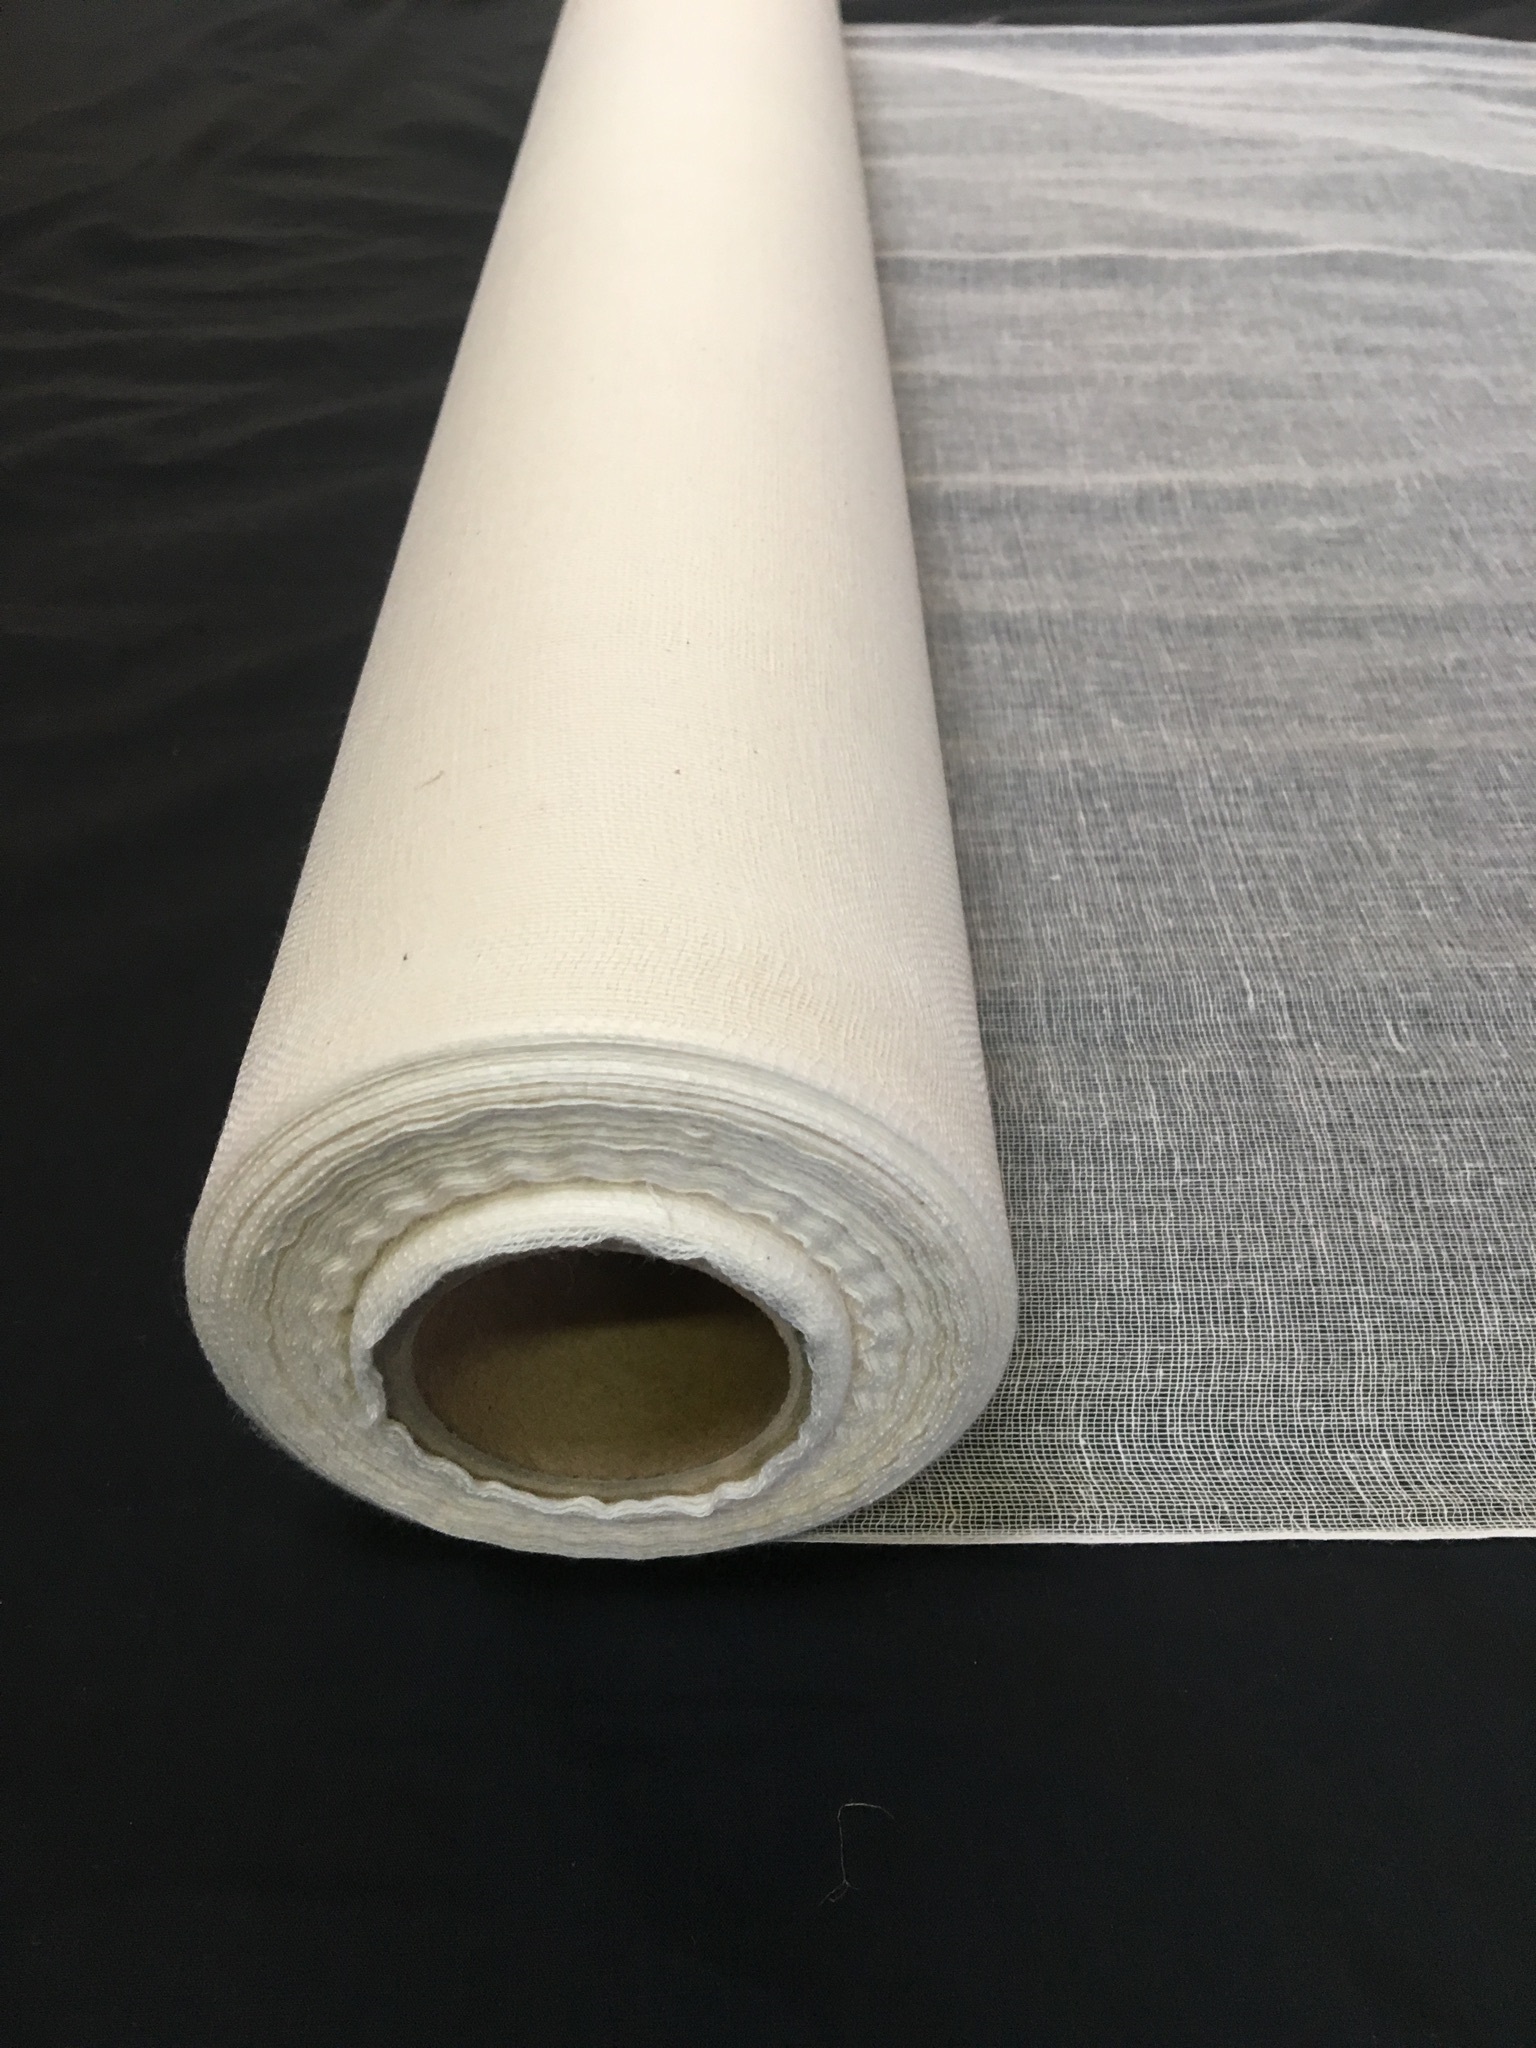 Unbleached Grade 50 Cheesecloth 100 Yard Roll 36 wide